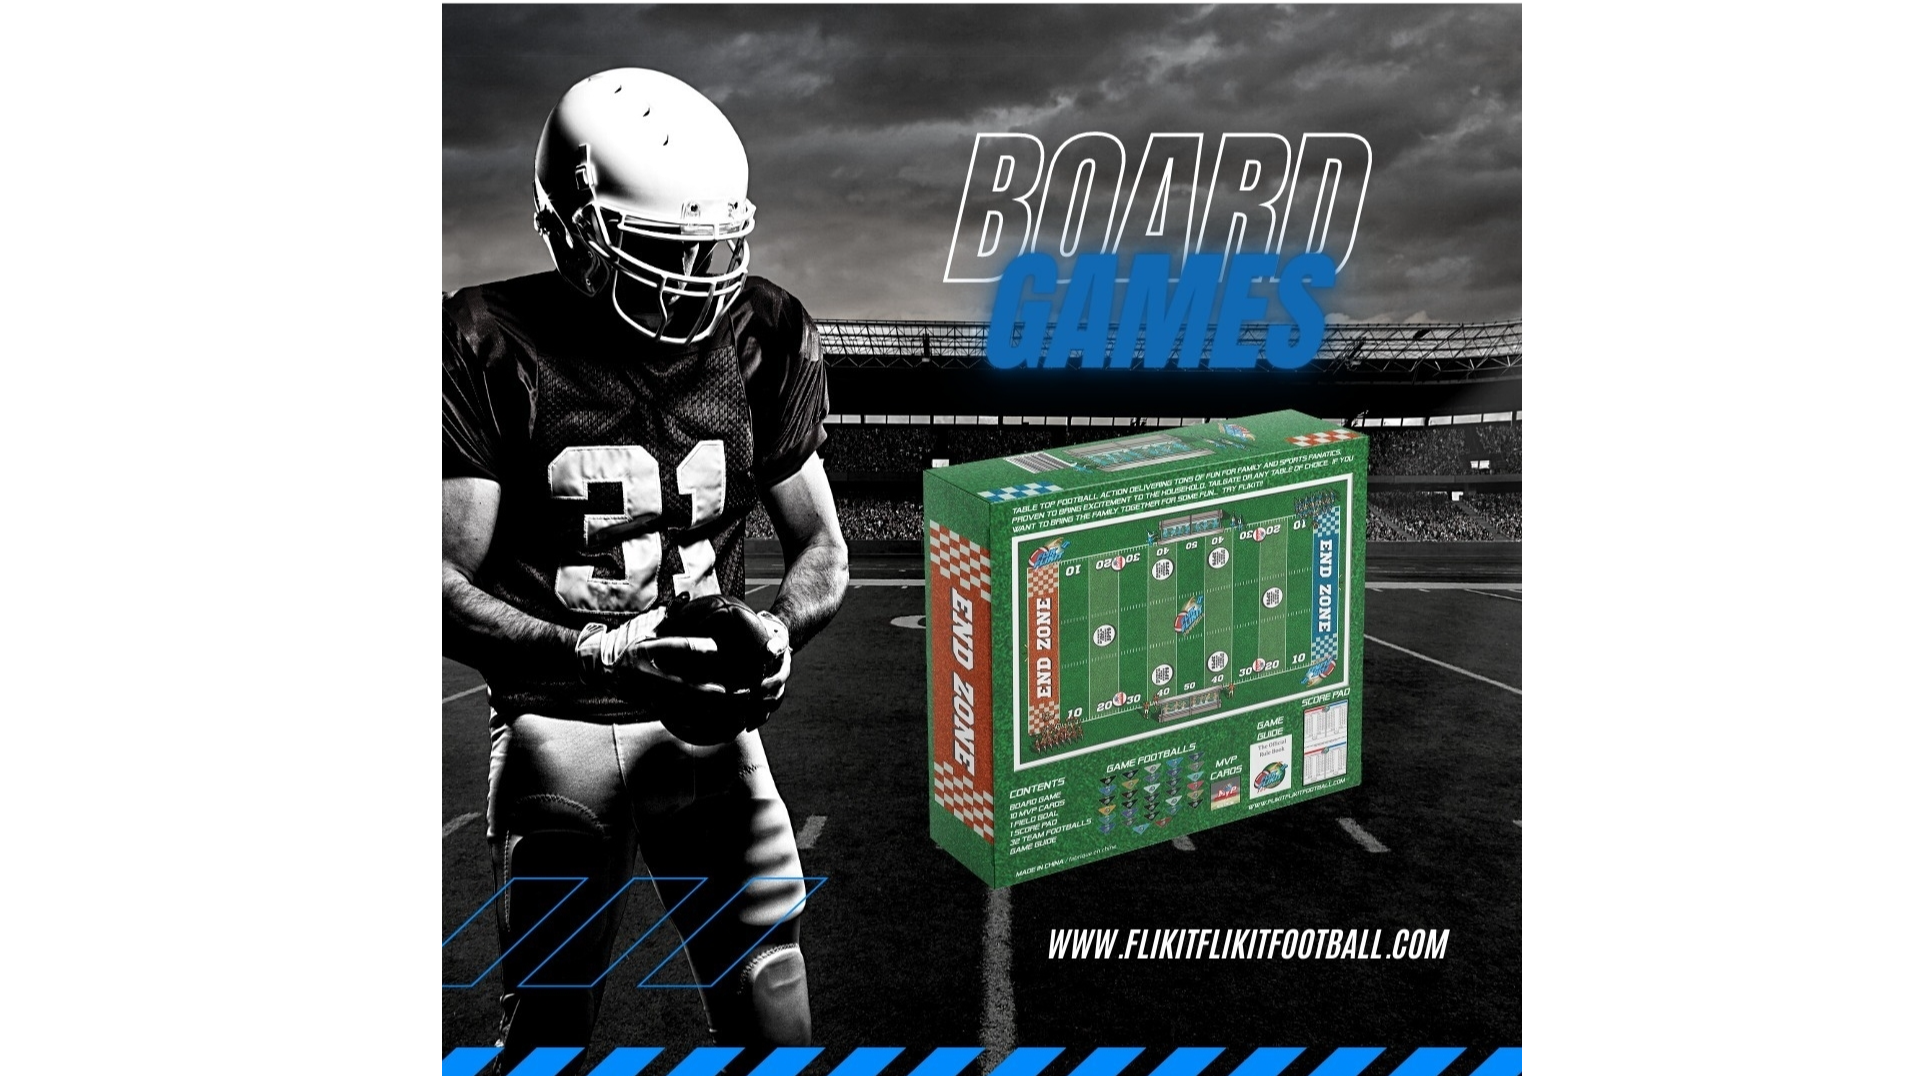 Football Fans: Bring Festive Family Fun With This Flicking Awesome Tabletop Game